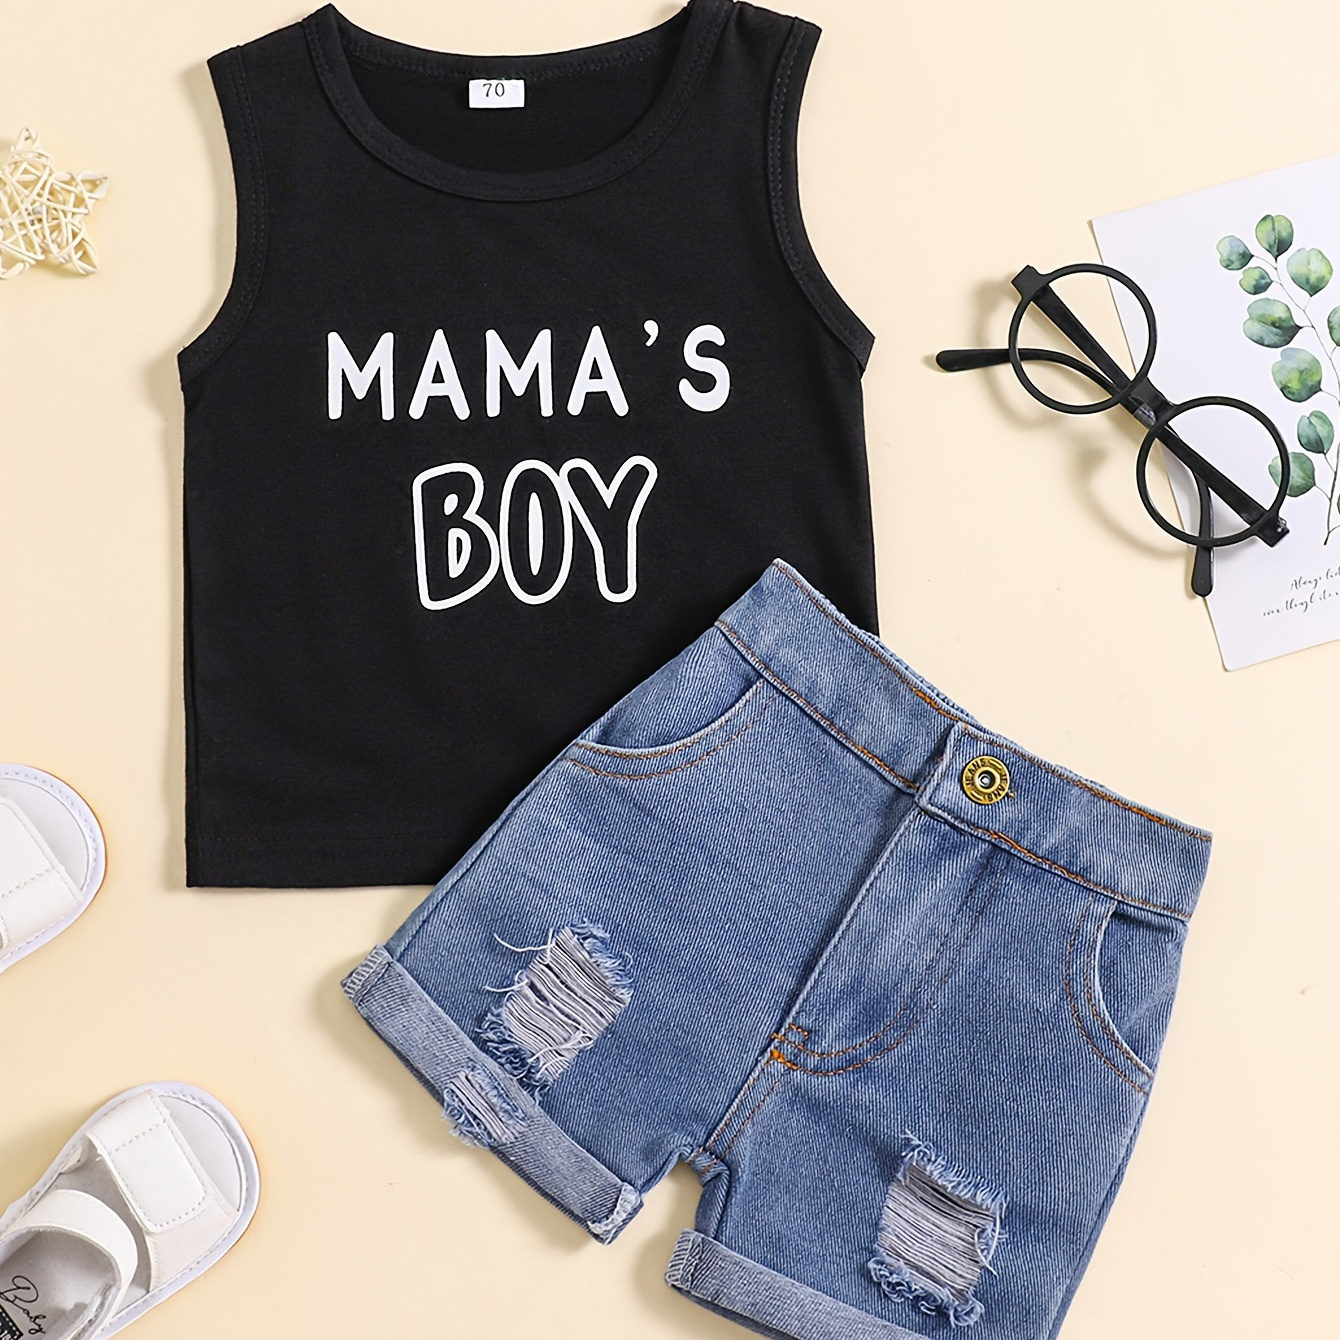 

Toddler Girls Boys' 2-piece Set, "mama's Boy" Sleeveless Black Tank Top With Ripped Denim Shorts, Casual Summer Outfit